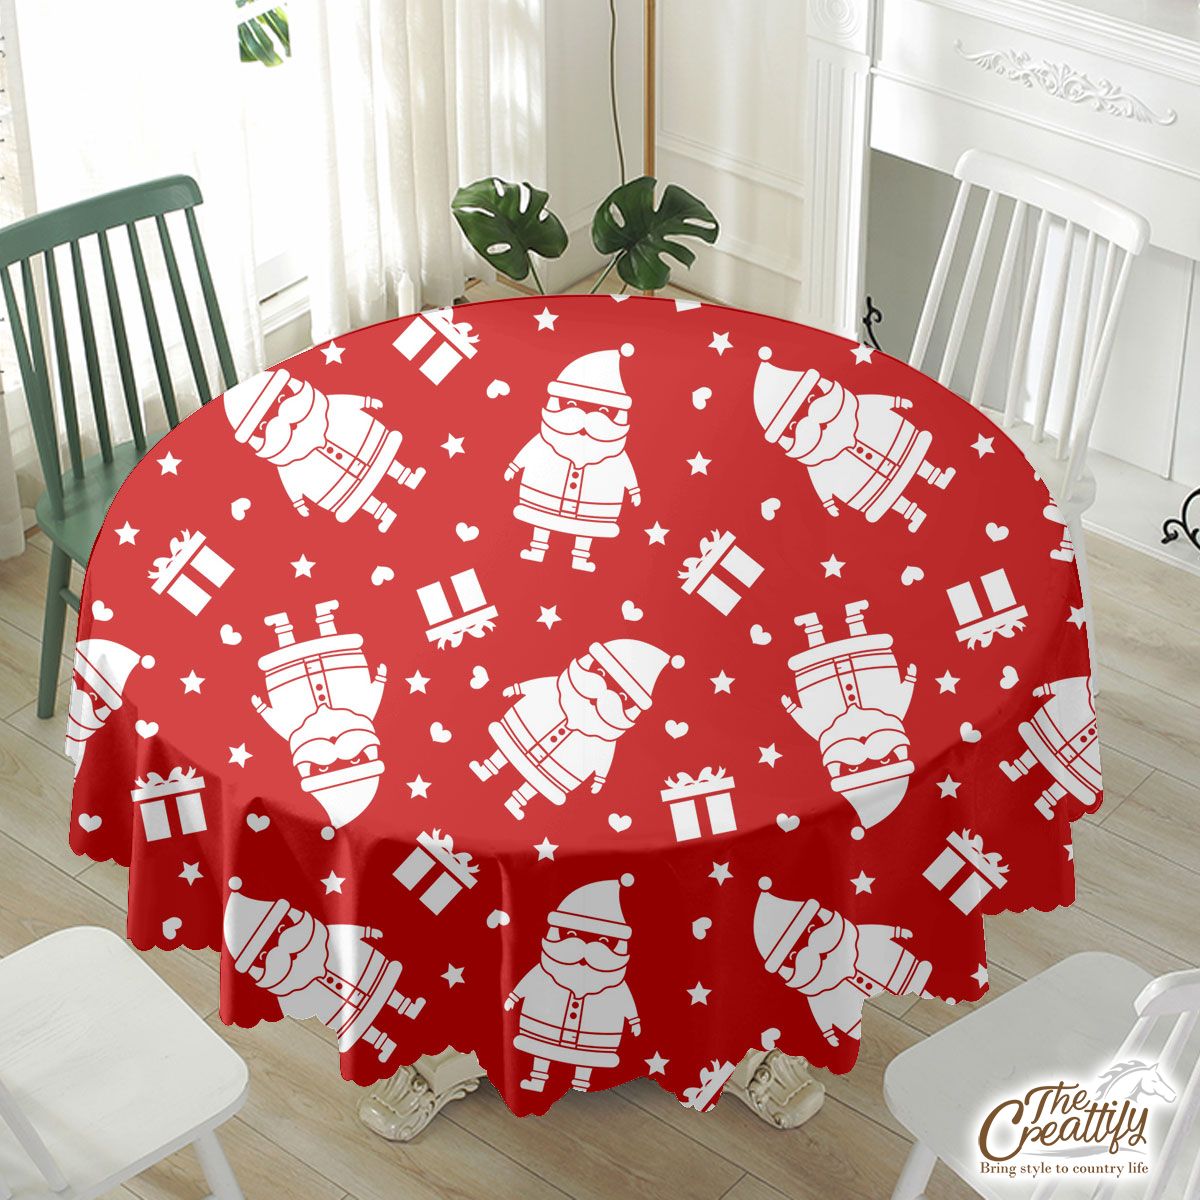 Cute Santa Claus With Christmas Gifts On The Red Background Waterproof Tablecloth